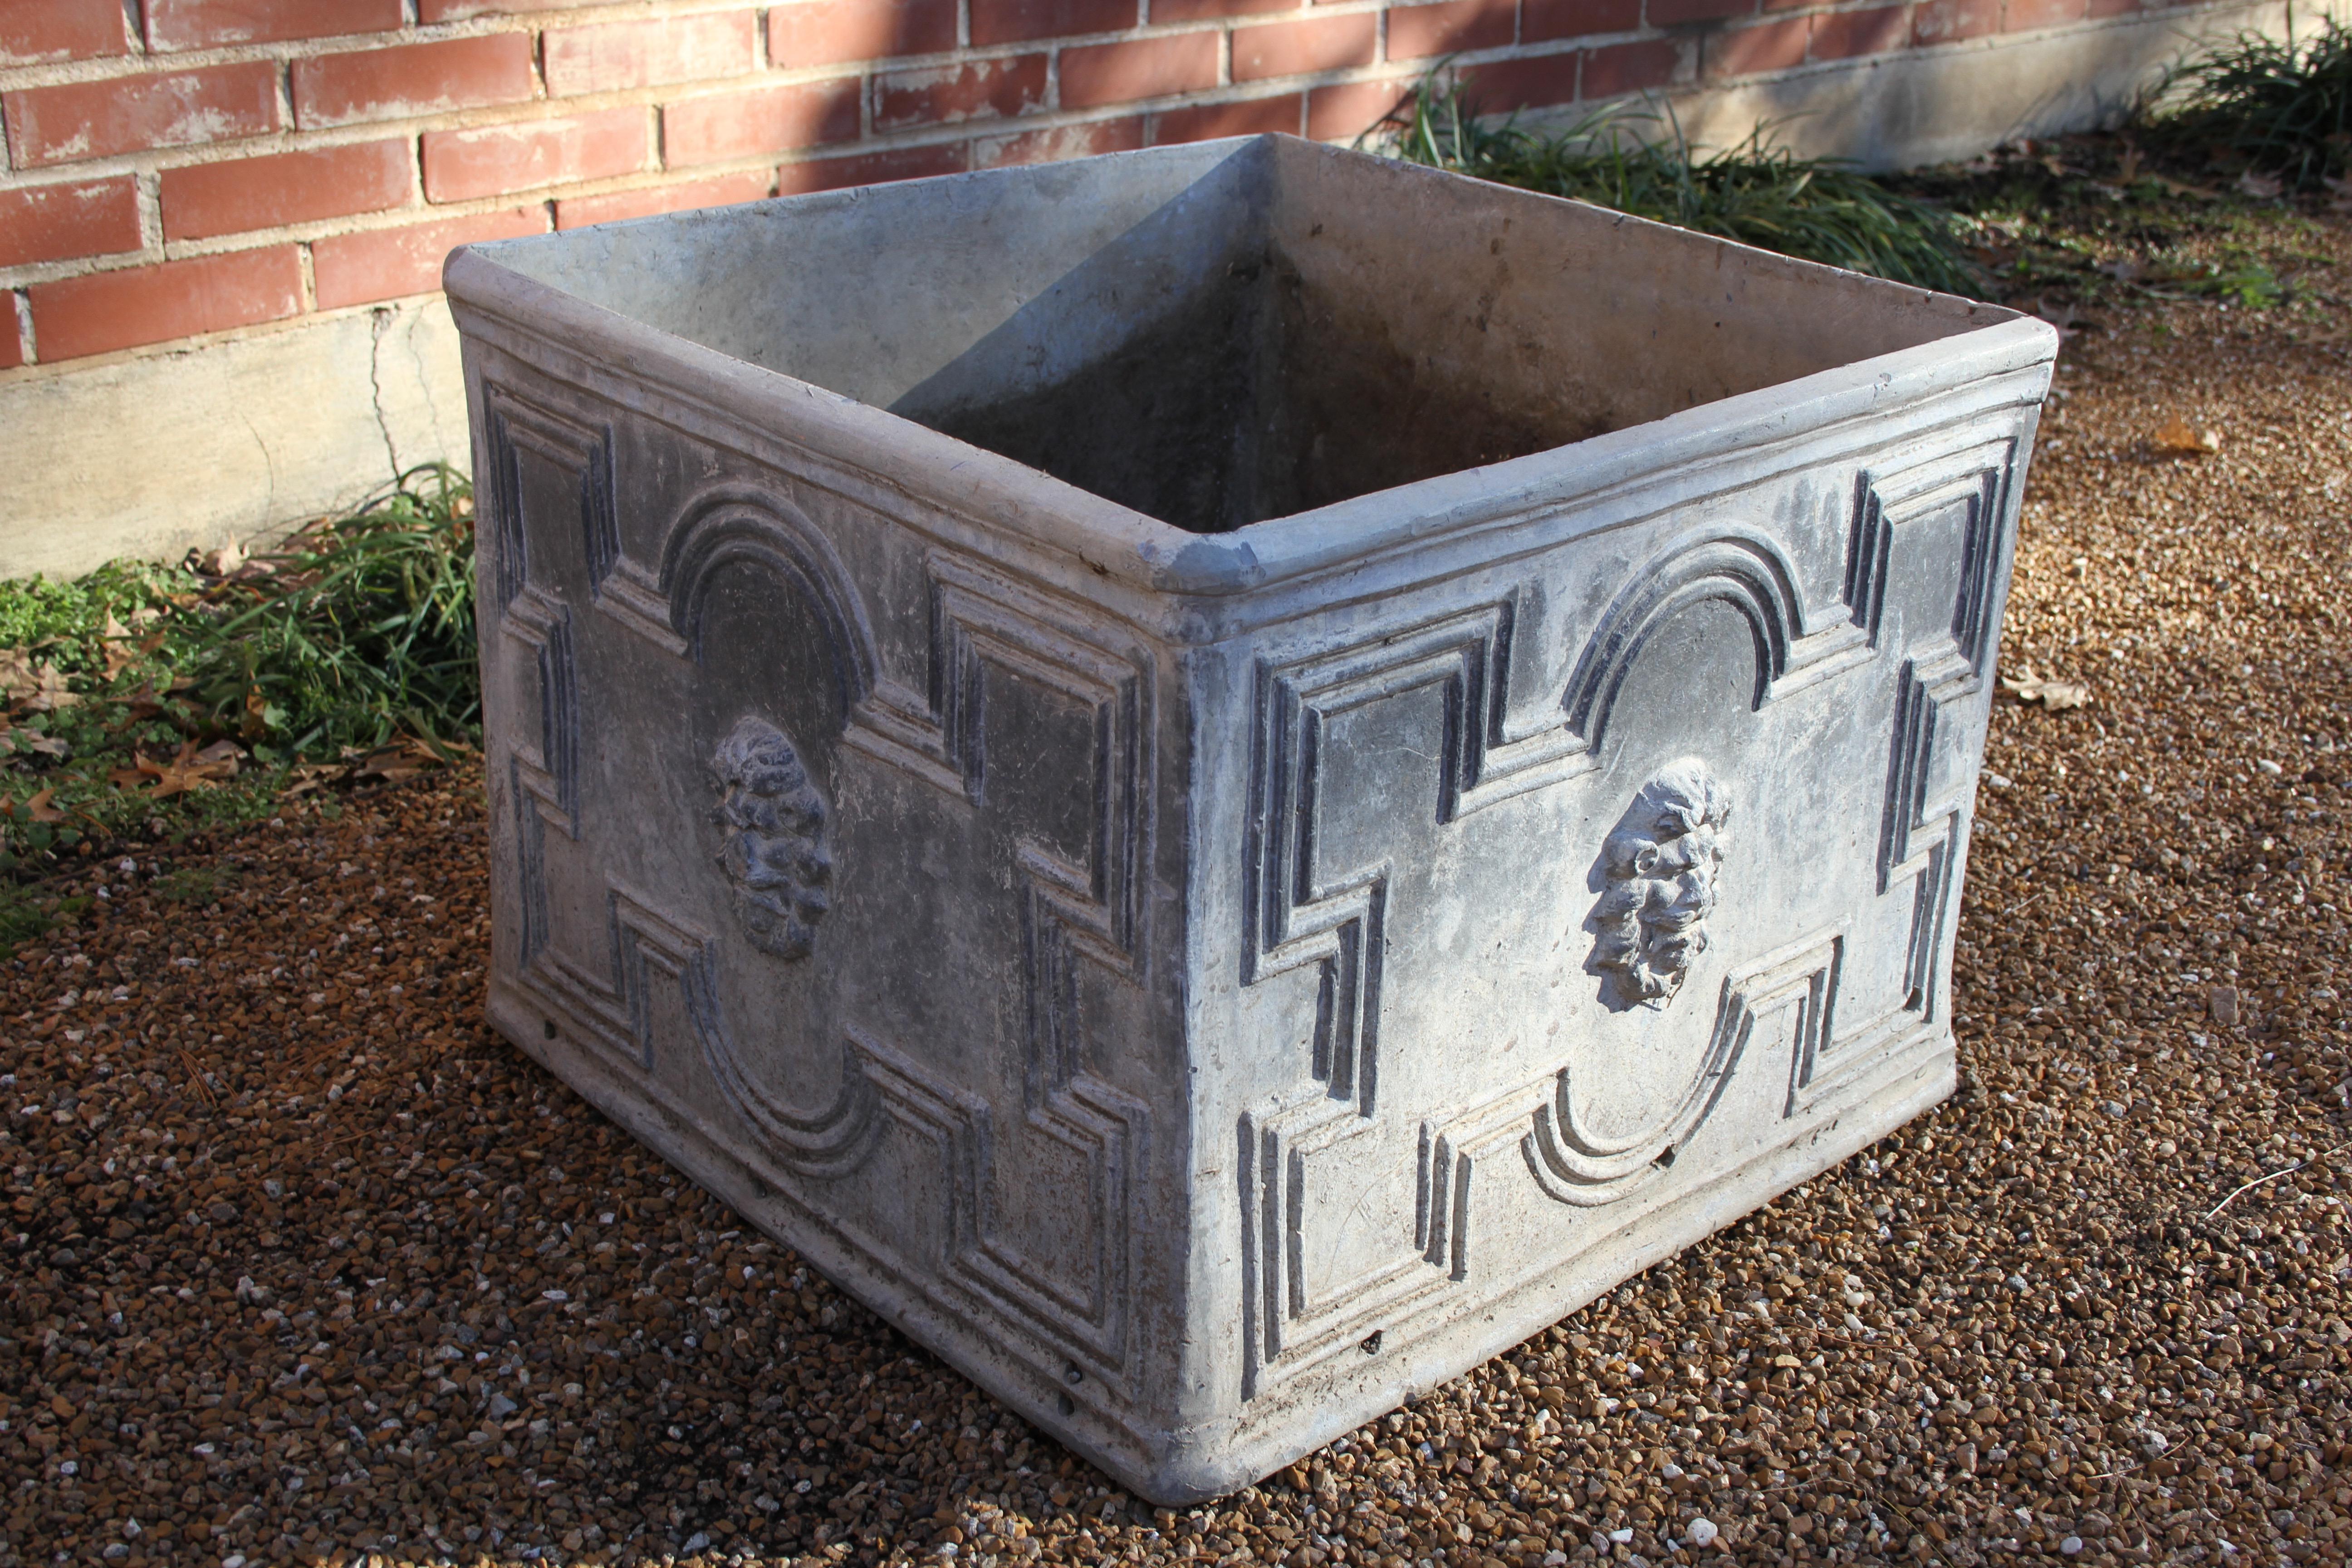 Pair shown are sold, Another pair available, no holes drilled in sides. New photos, coming soon.  

Antique lead planters with lions head and fantastic patina, from wonderful and elegant neoclassical home. These lead planters are very heavy, someone